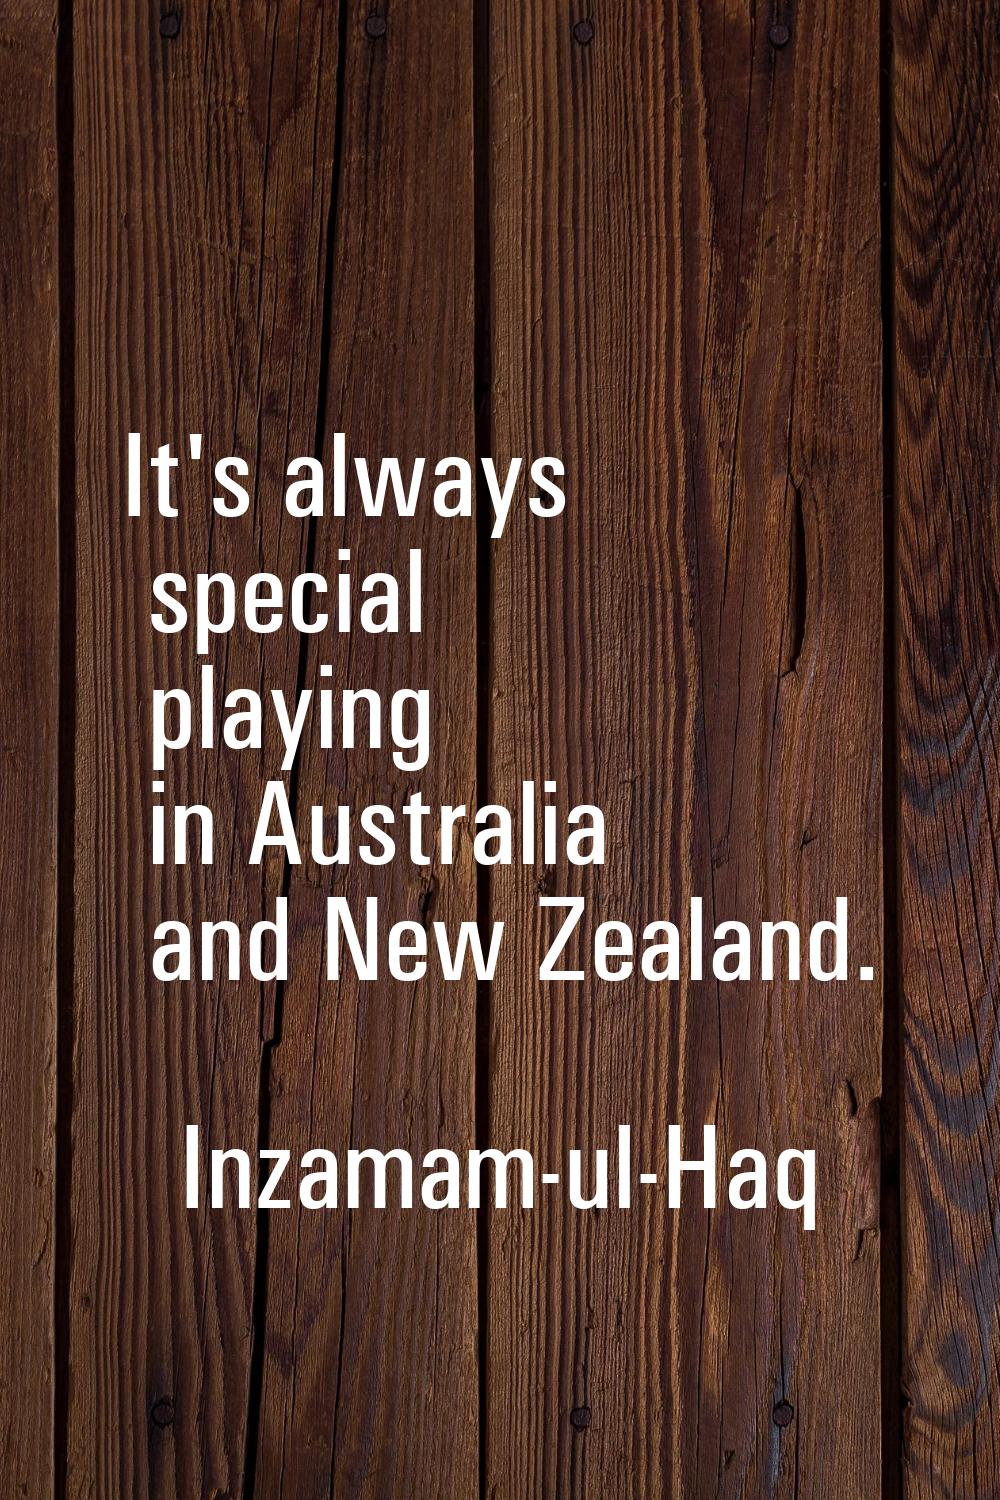 It's always special playing in Australia and New Zealand.